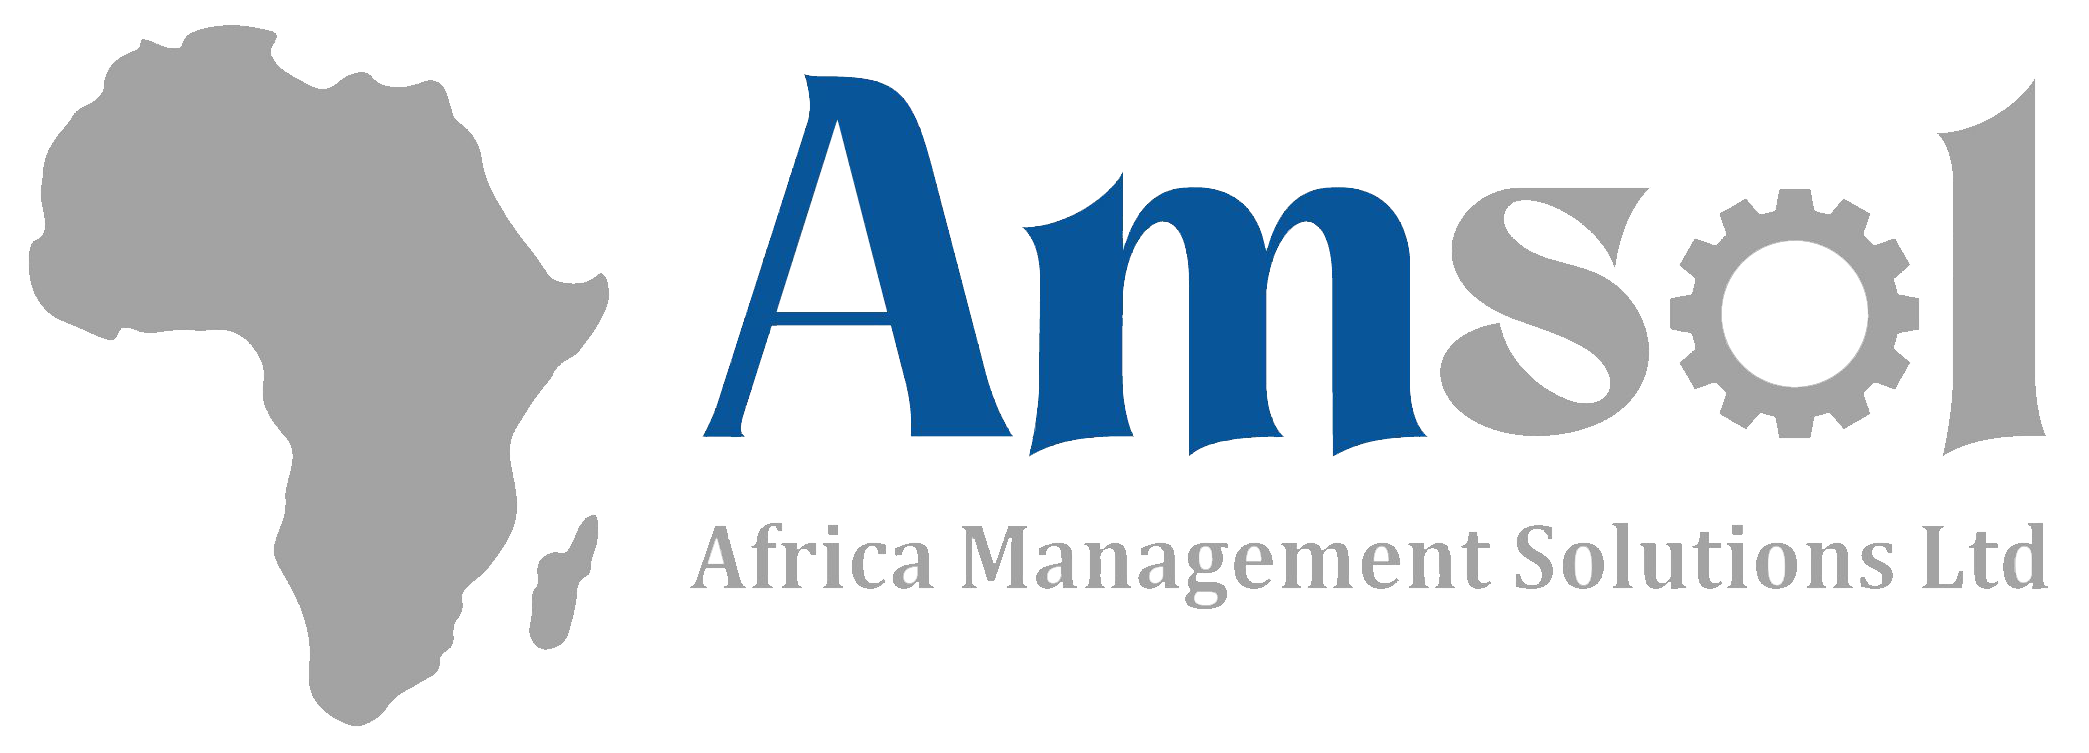 Africa Management Solutions Limited